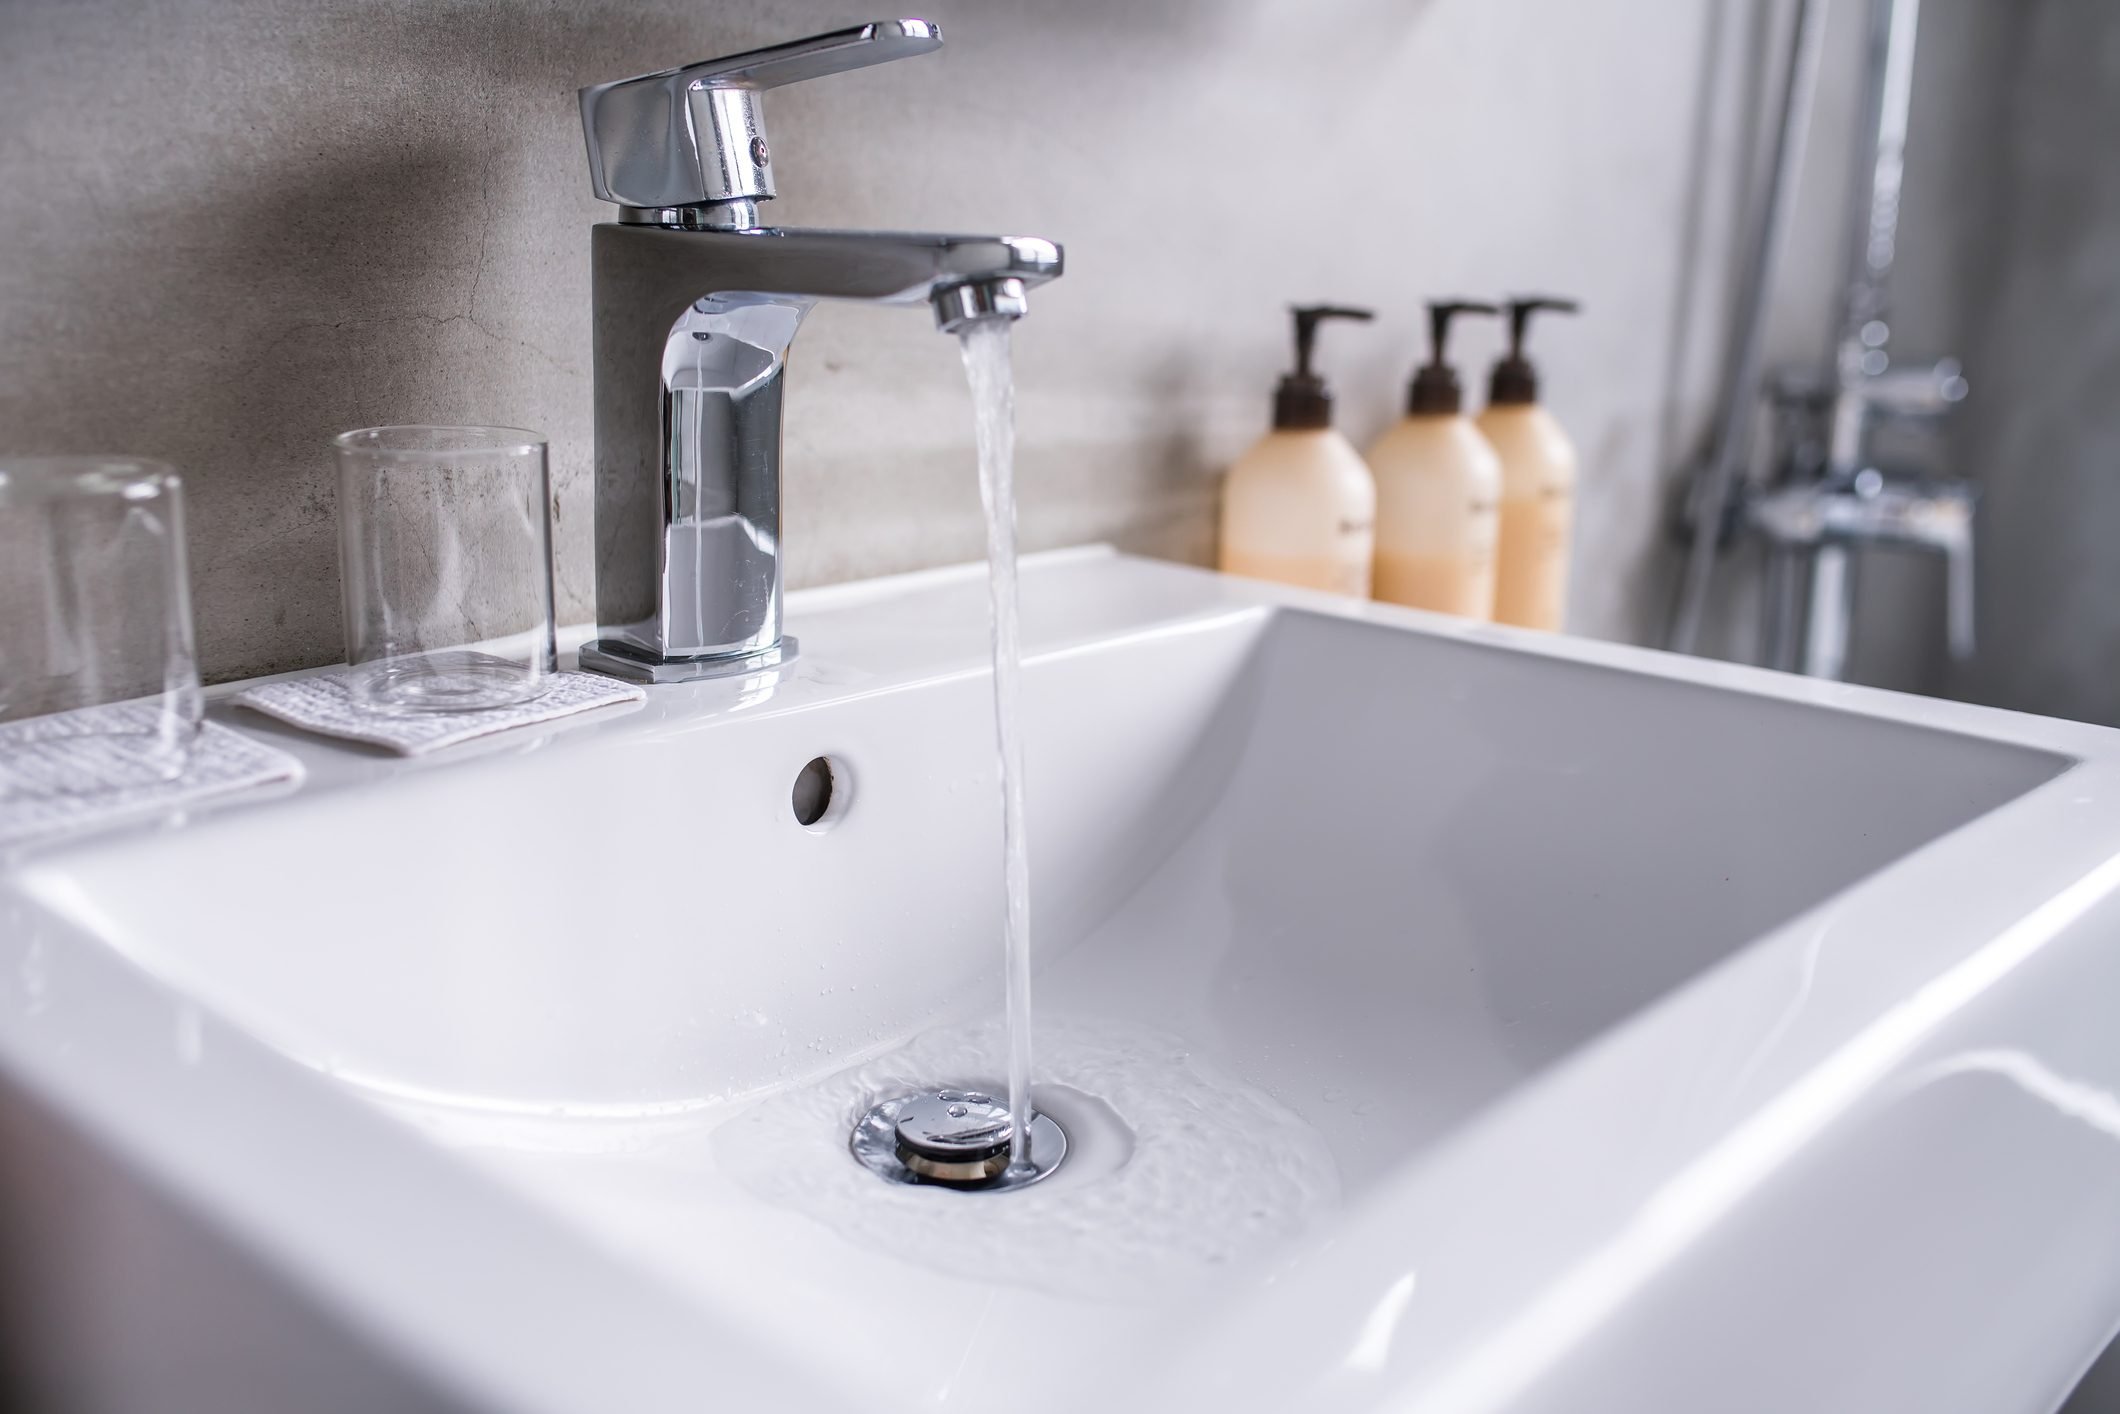 Here's how to unclog a sink - Reviewed